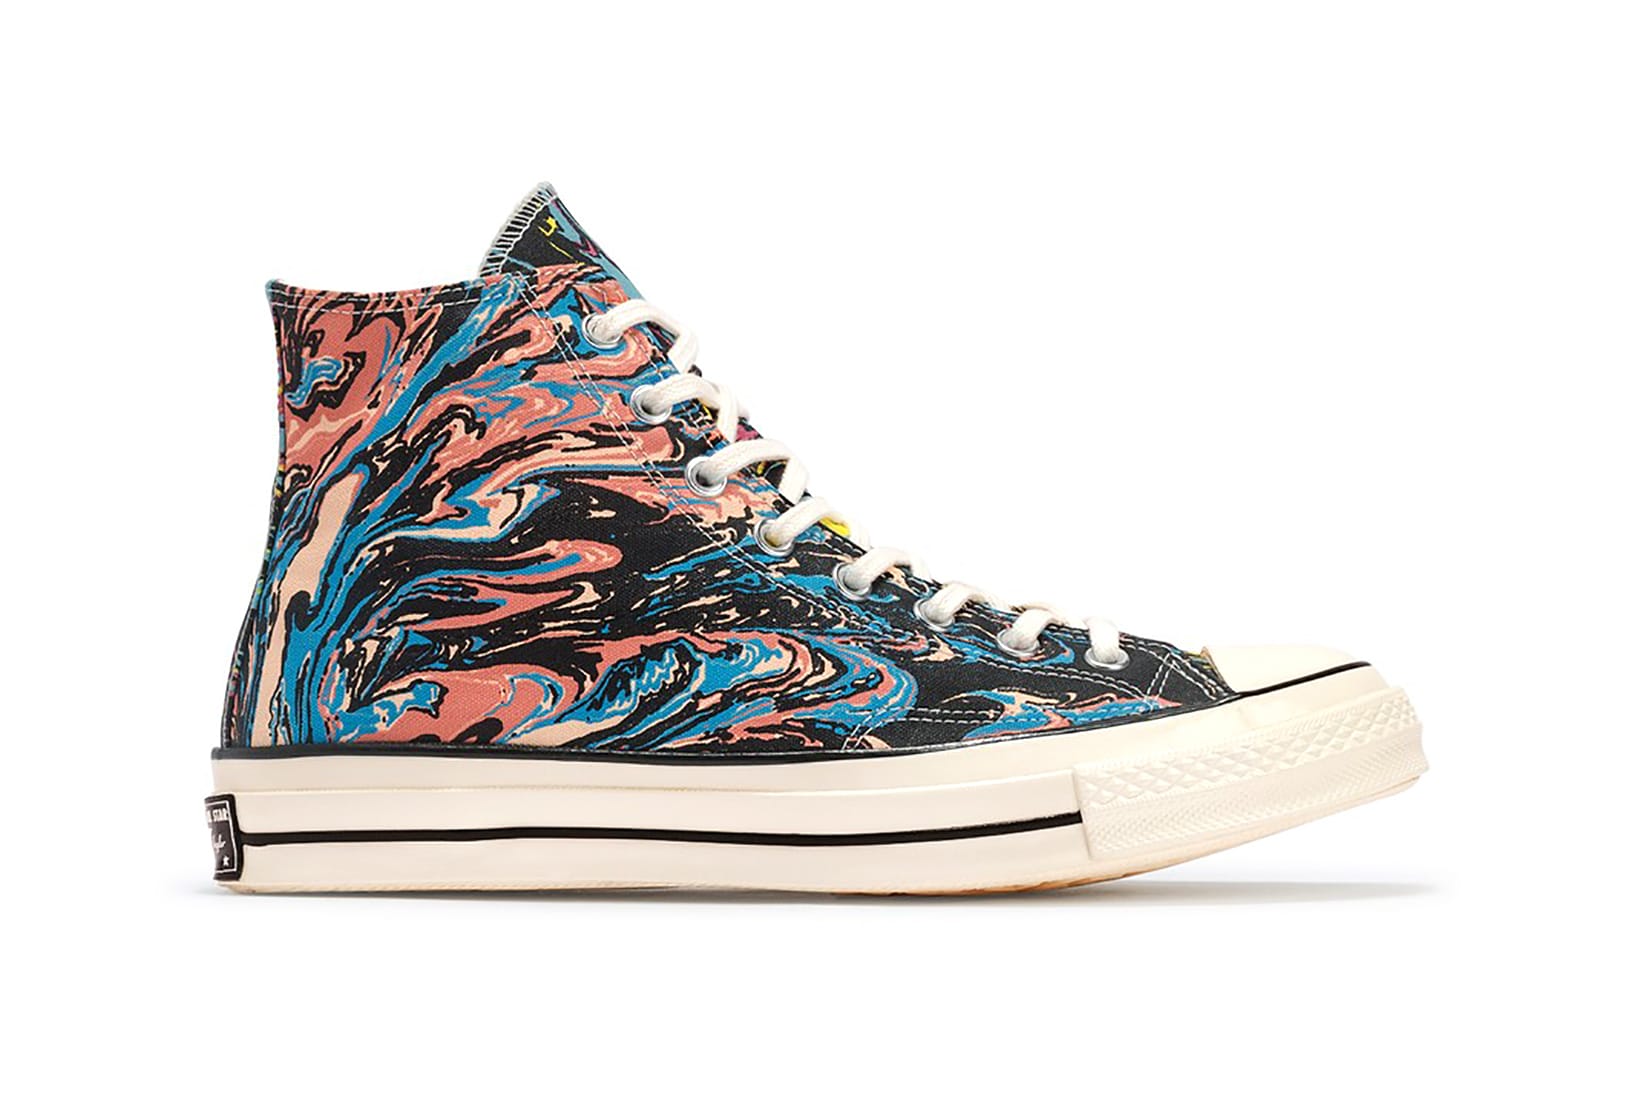 marble converse high top